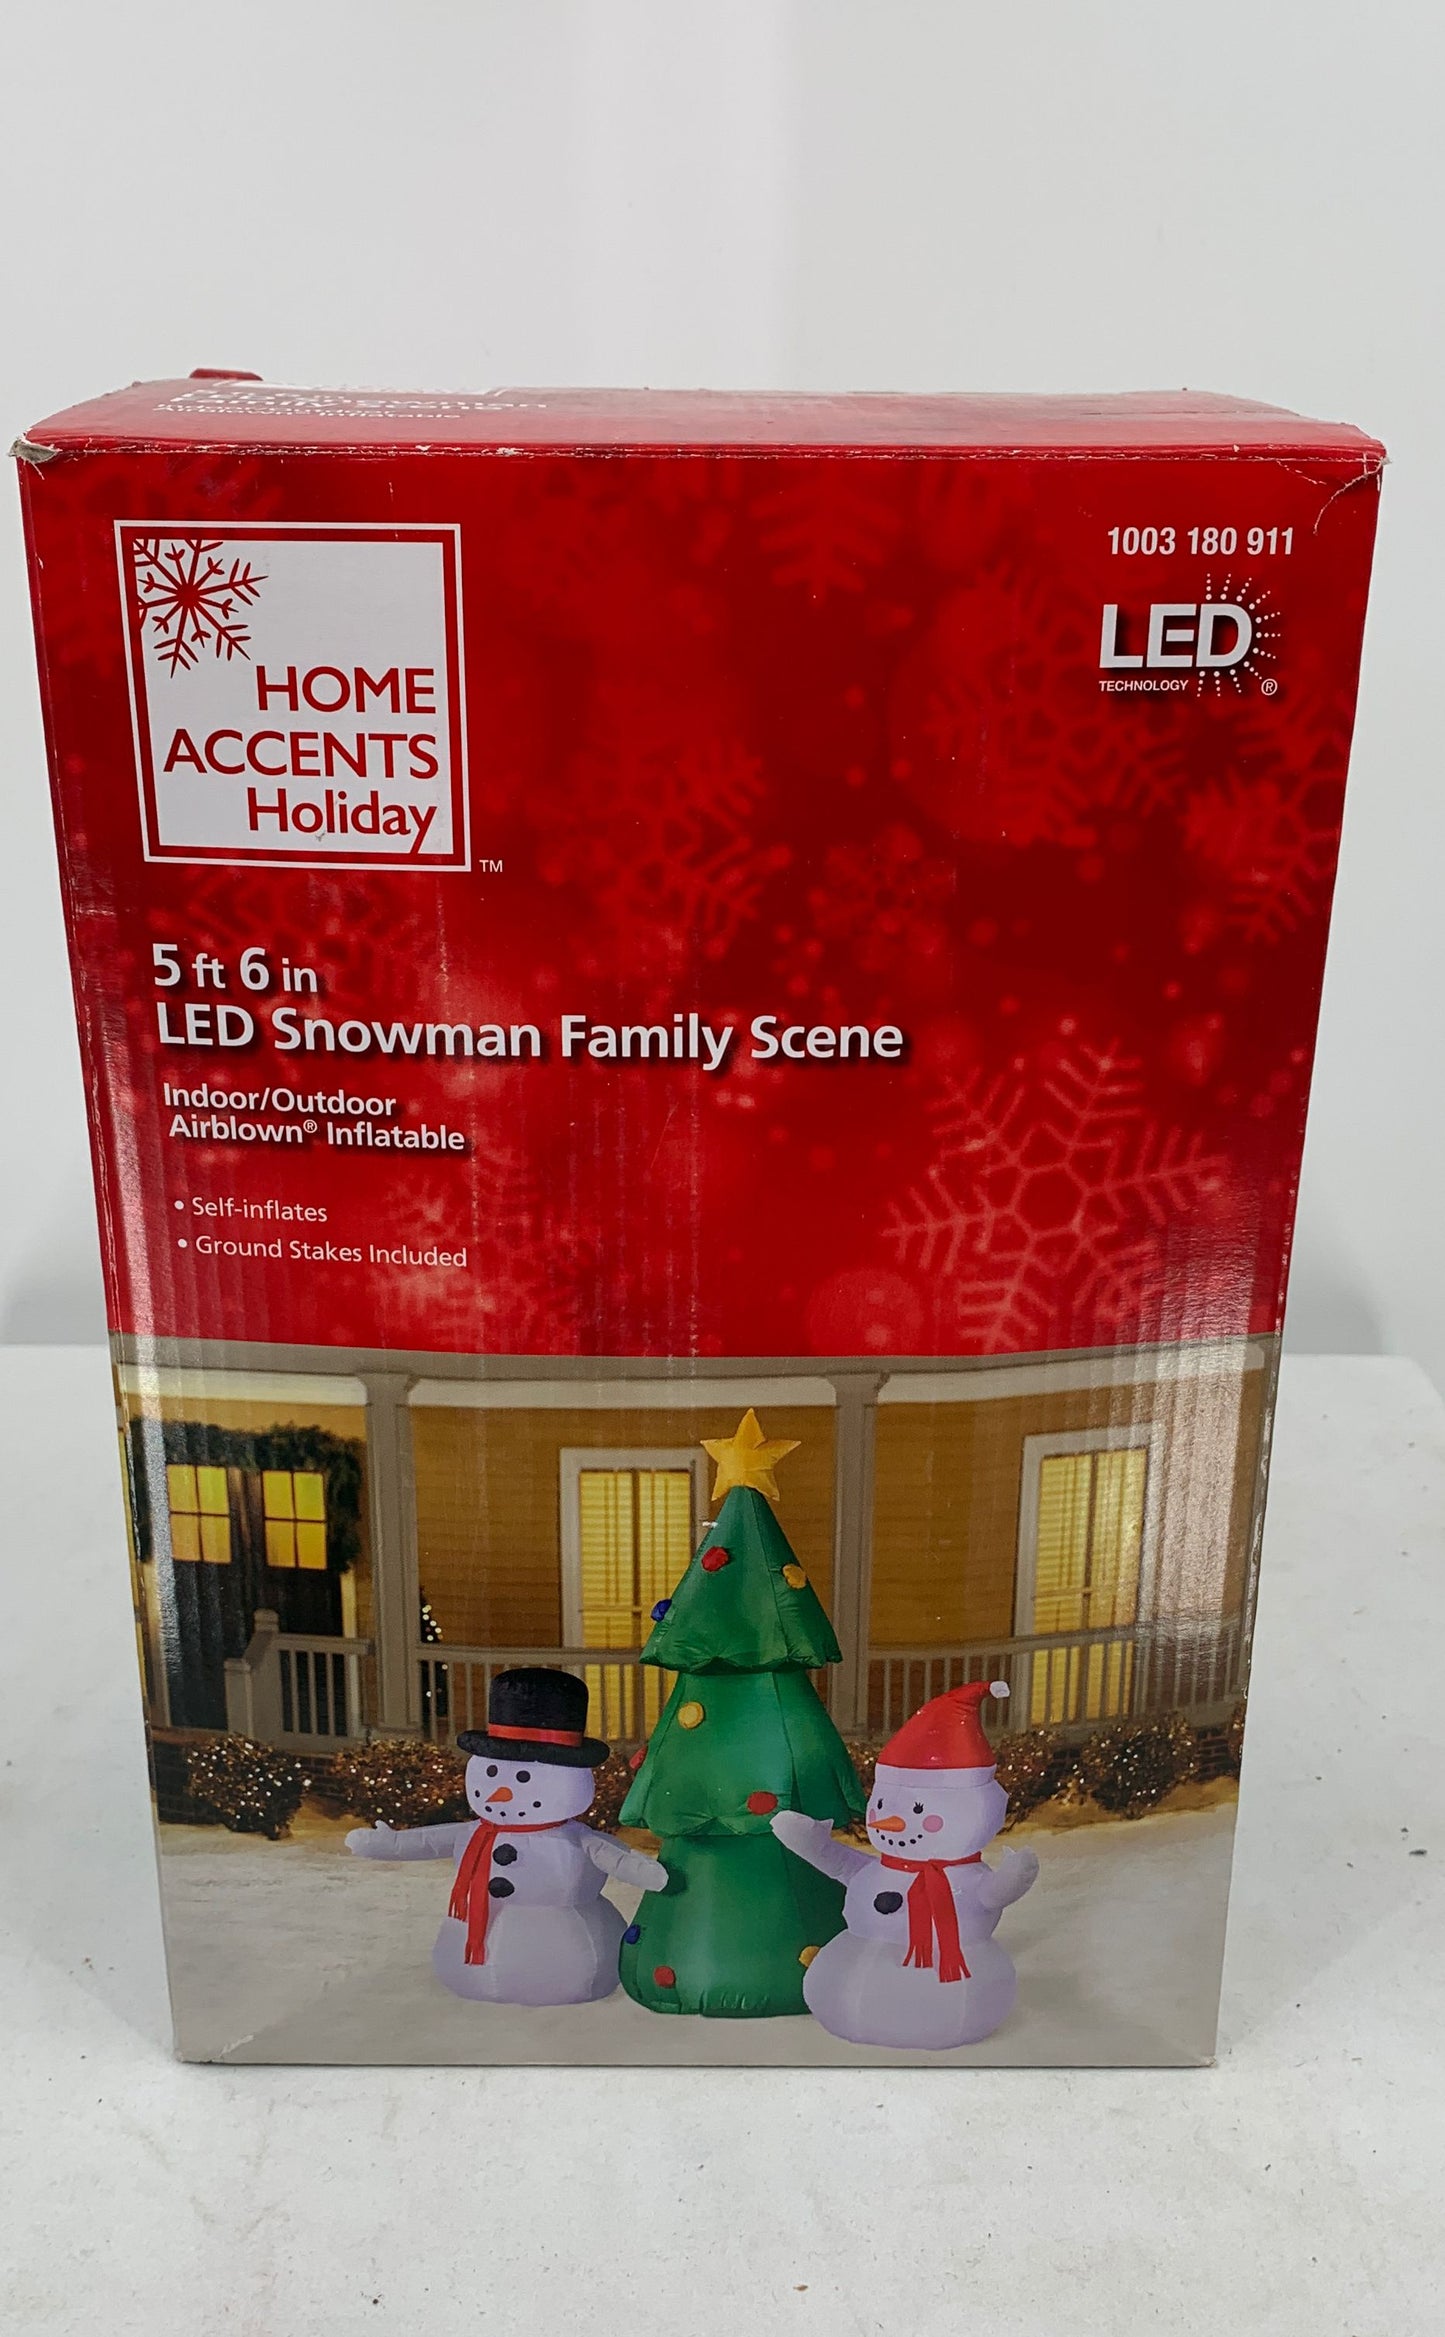 Home Accents Holiday 5' 6" Self Inflated Led Snowman Family Scene